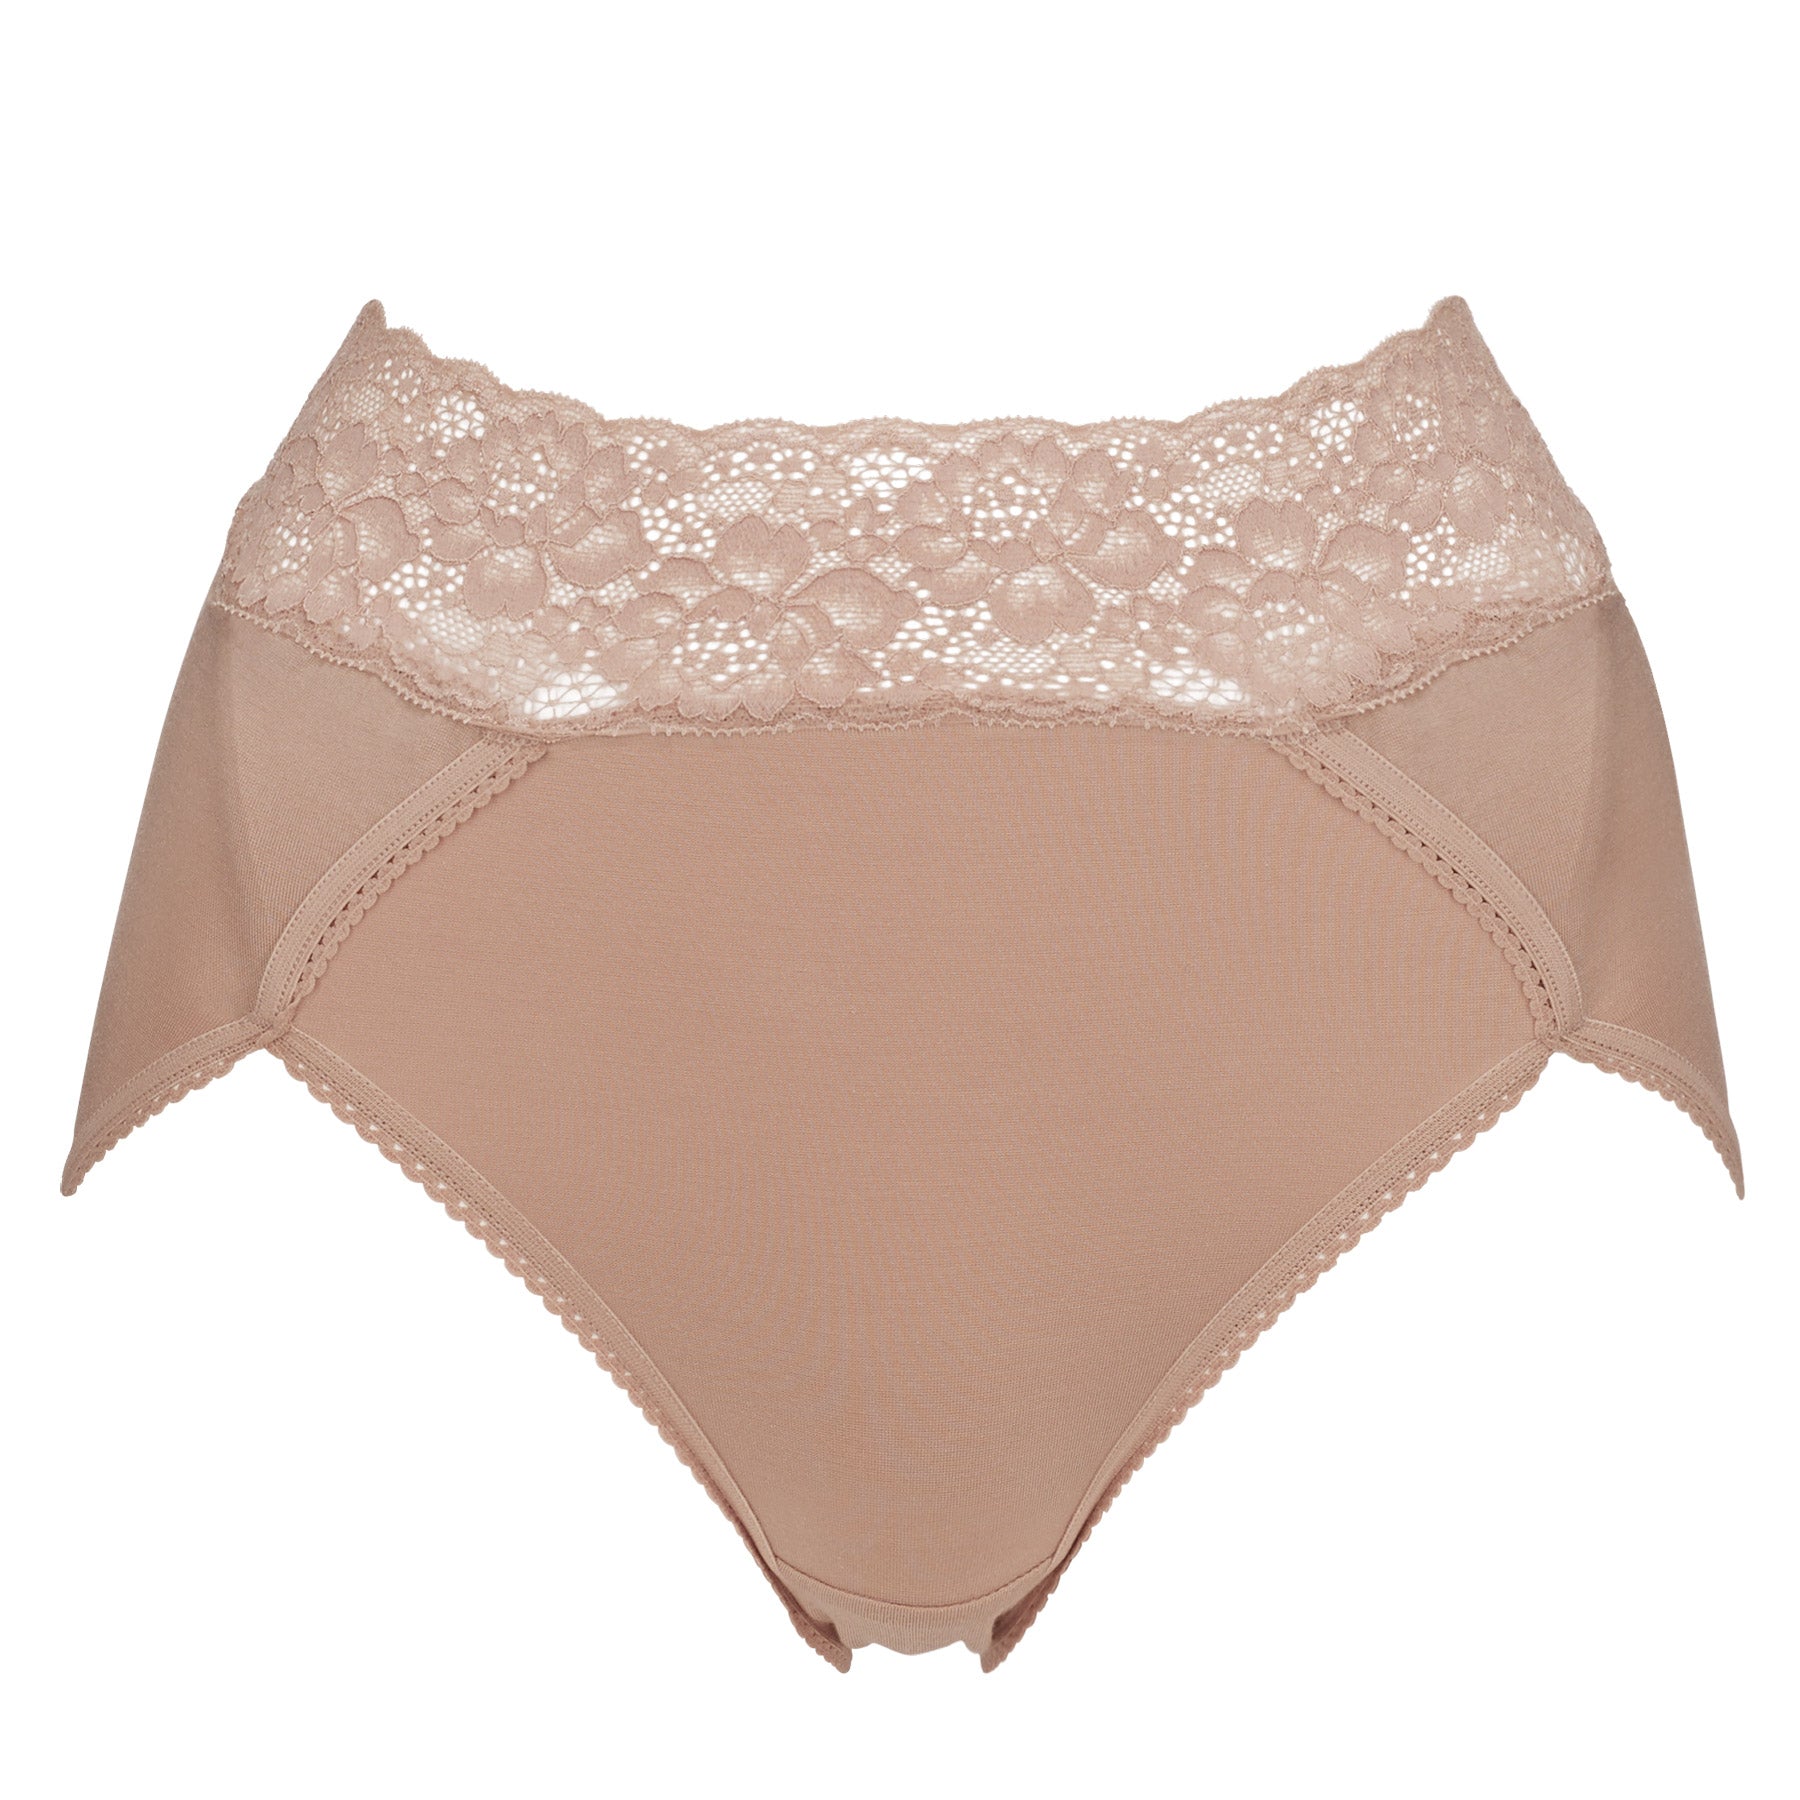 High waist French knickers : Lepel Belseno 238